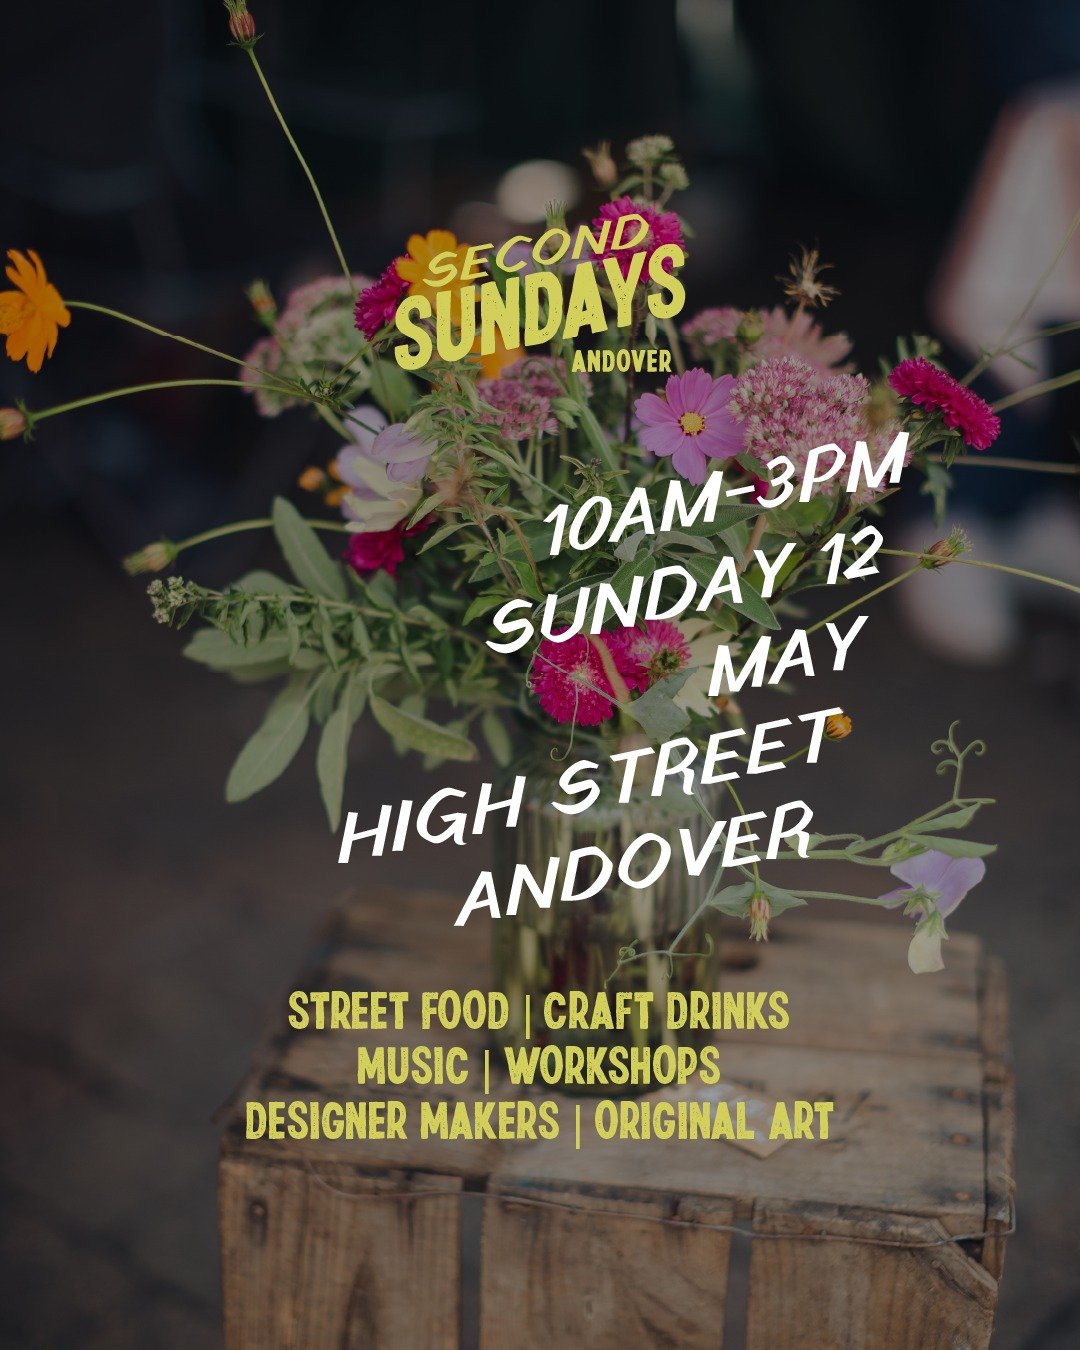 📢 Next market: Sunday 12 May 📢

We'll be springing back onto Andover High St in a few weeks' time, to bring you local traders, delicious street food, music and more.

Keep an eye out 👀 for more details coming soon. 

#hampshire #markets #hampshire